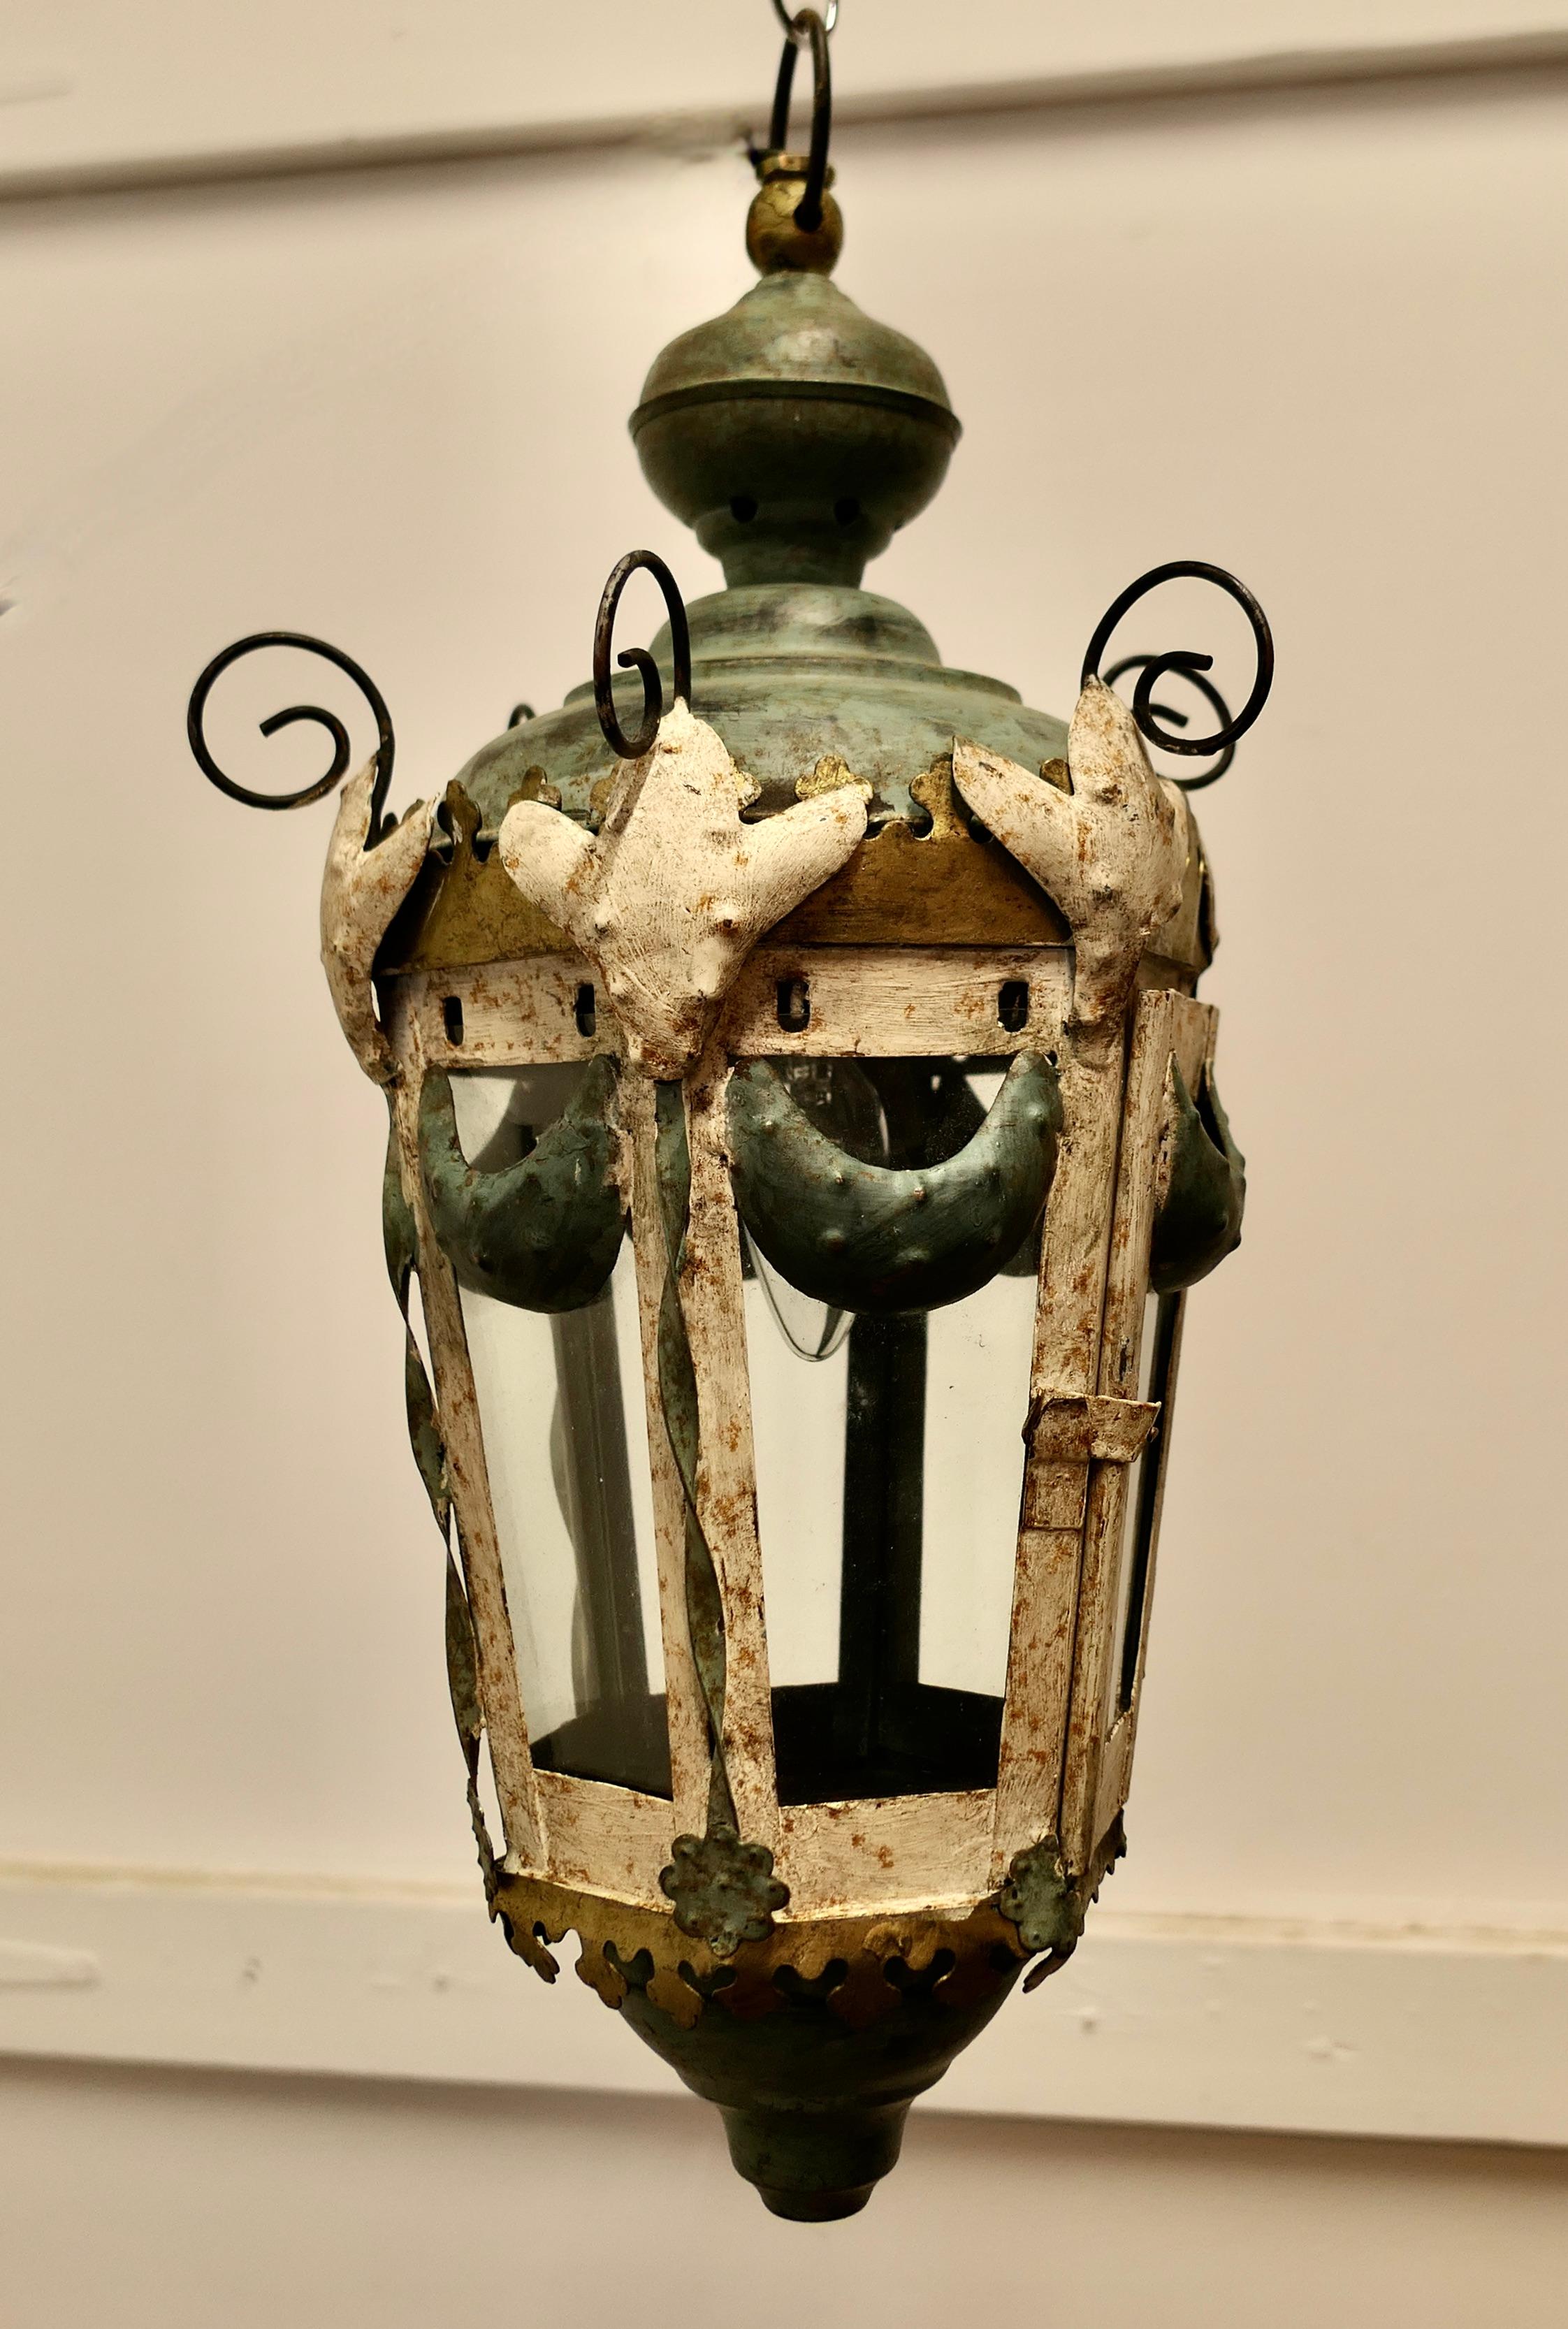 A Very Decorative Italian Tolwear Lantern In Good Condition For Sale In Chillerton, Isle of Wight